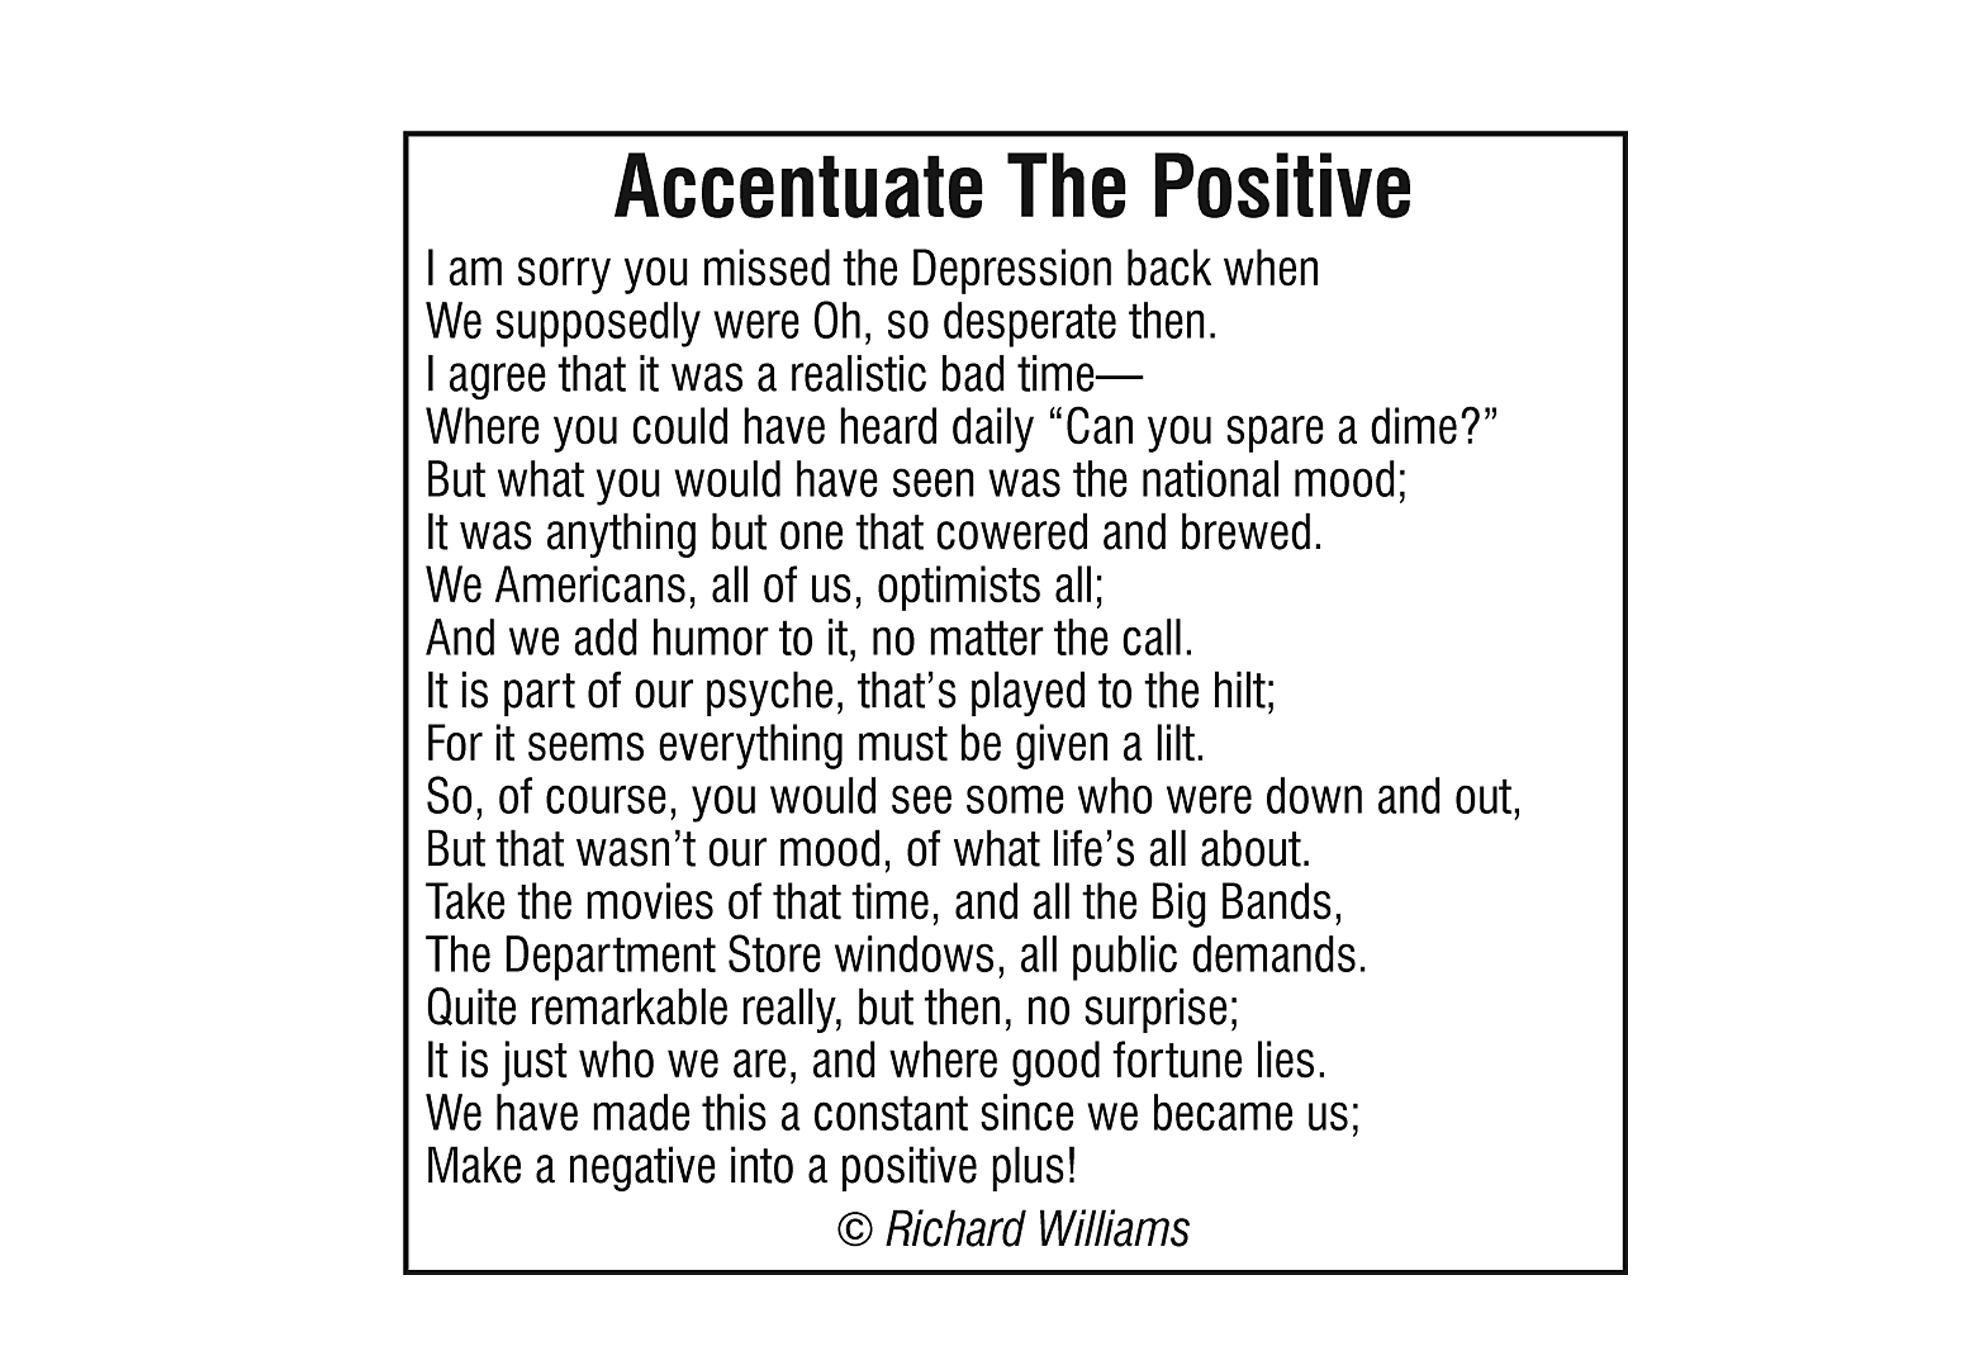 Richard Williams Poem: Accentuate The Positive